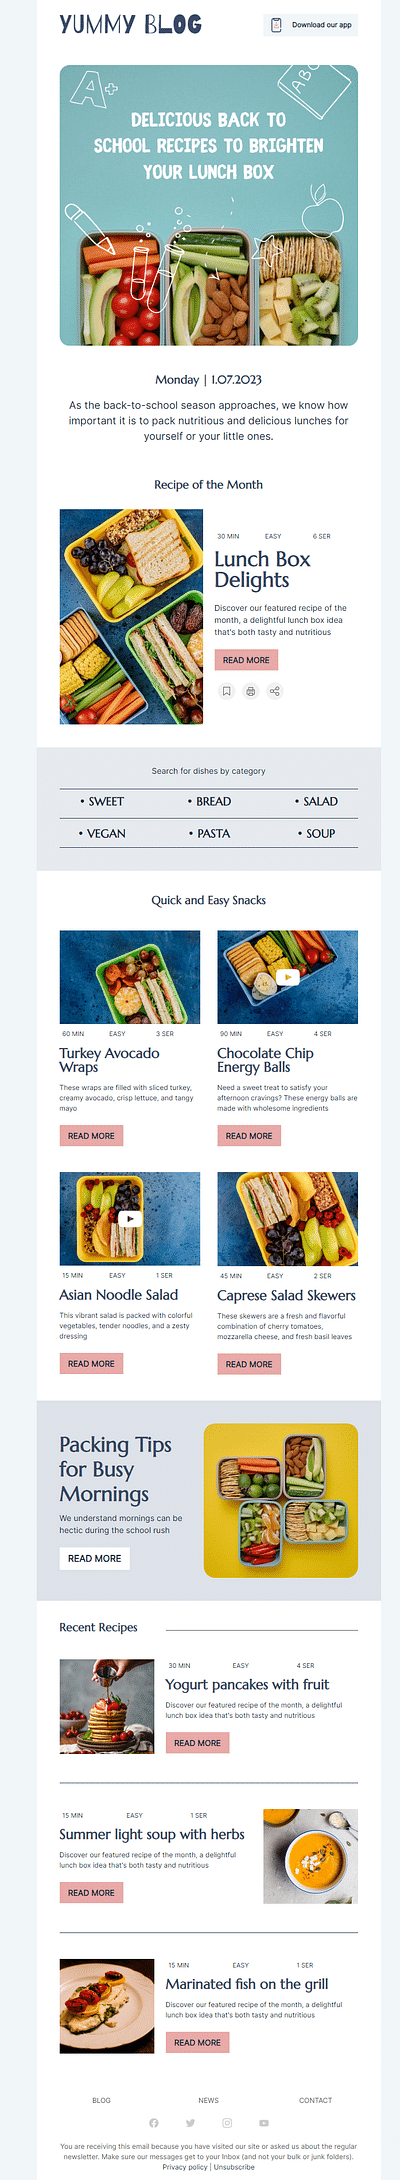 Yummy Blog email Template design - Email Marketing